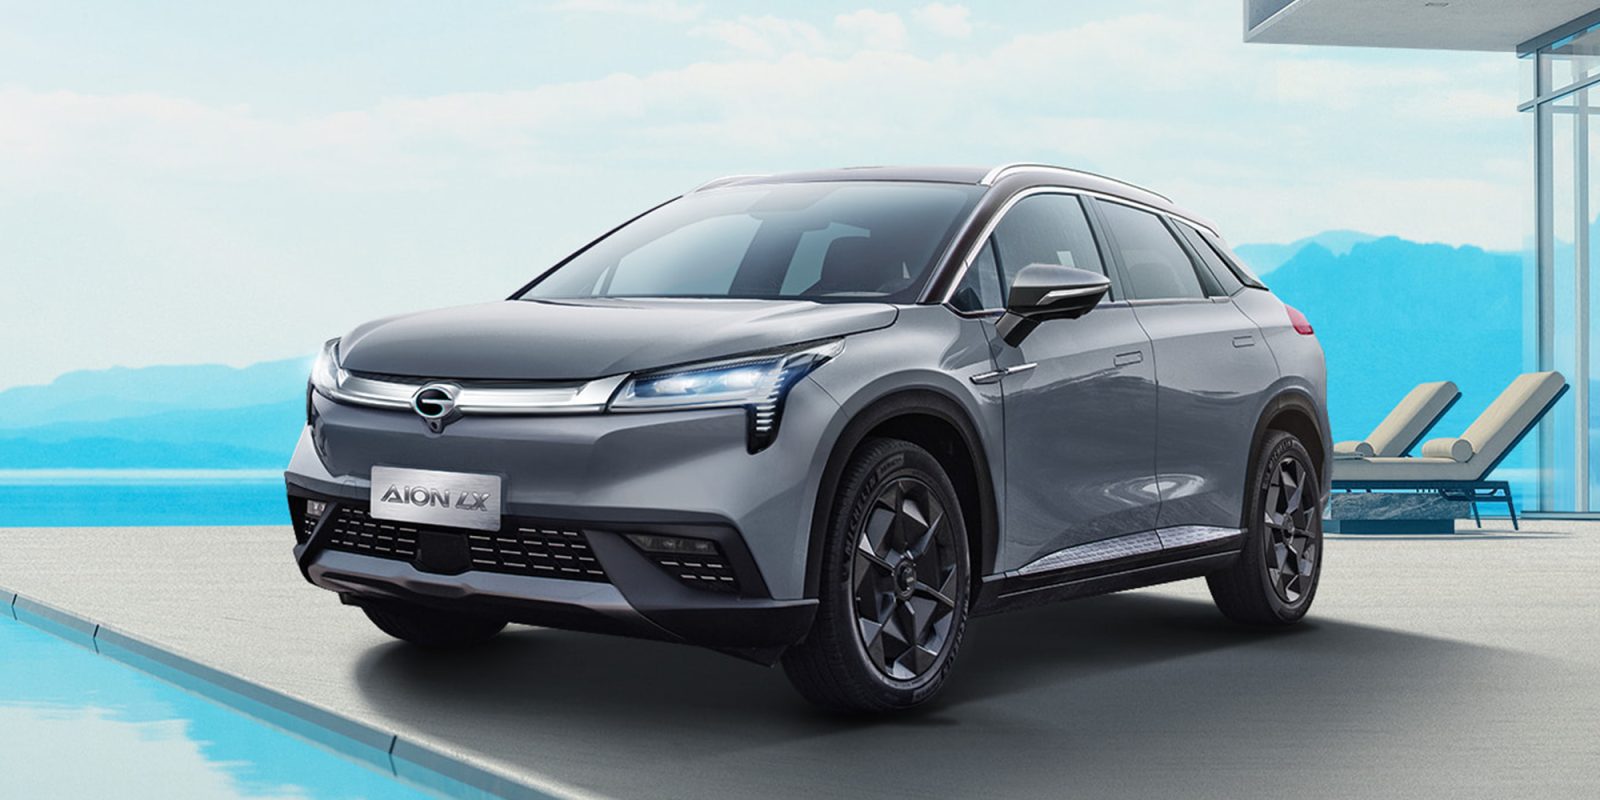 GAC Aion to launch LX Plus SUV in China with over 620 miles of range